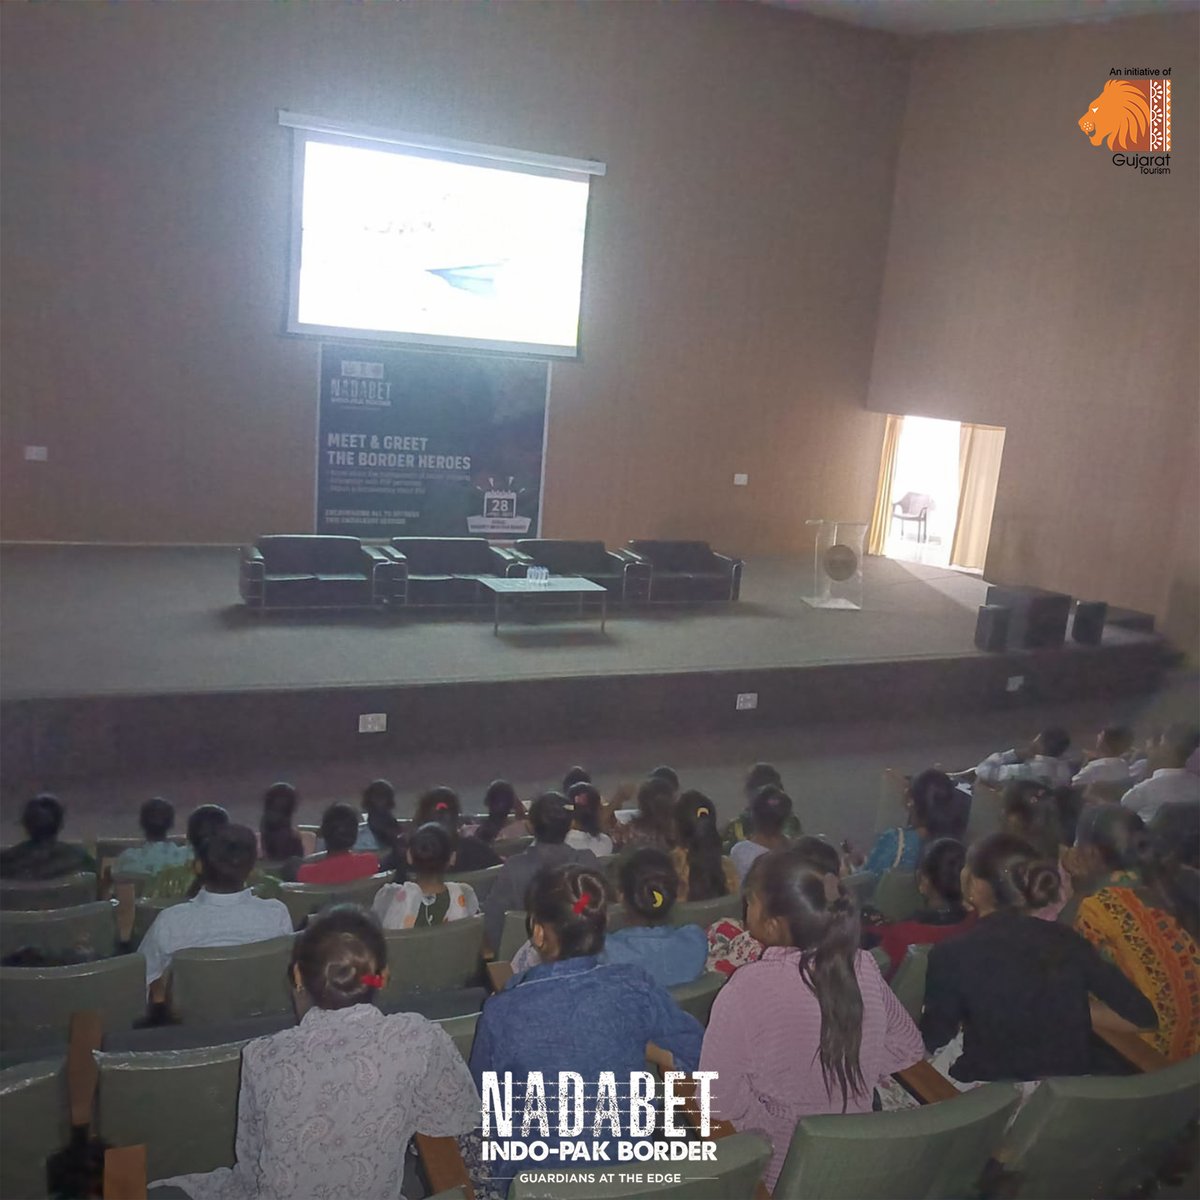 The event inspired and encouraged the participants to appreciate the vital role played by our armed forces in safeguarding the nation.

#meetandgreet #visitnadabet #IndoPakBorder #NadabetBorder #Gujarat #gujarattourism #exploregujarat #incredibleindia